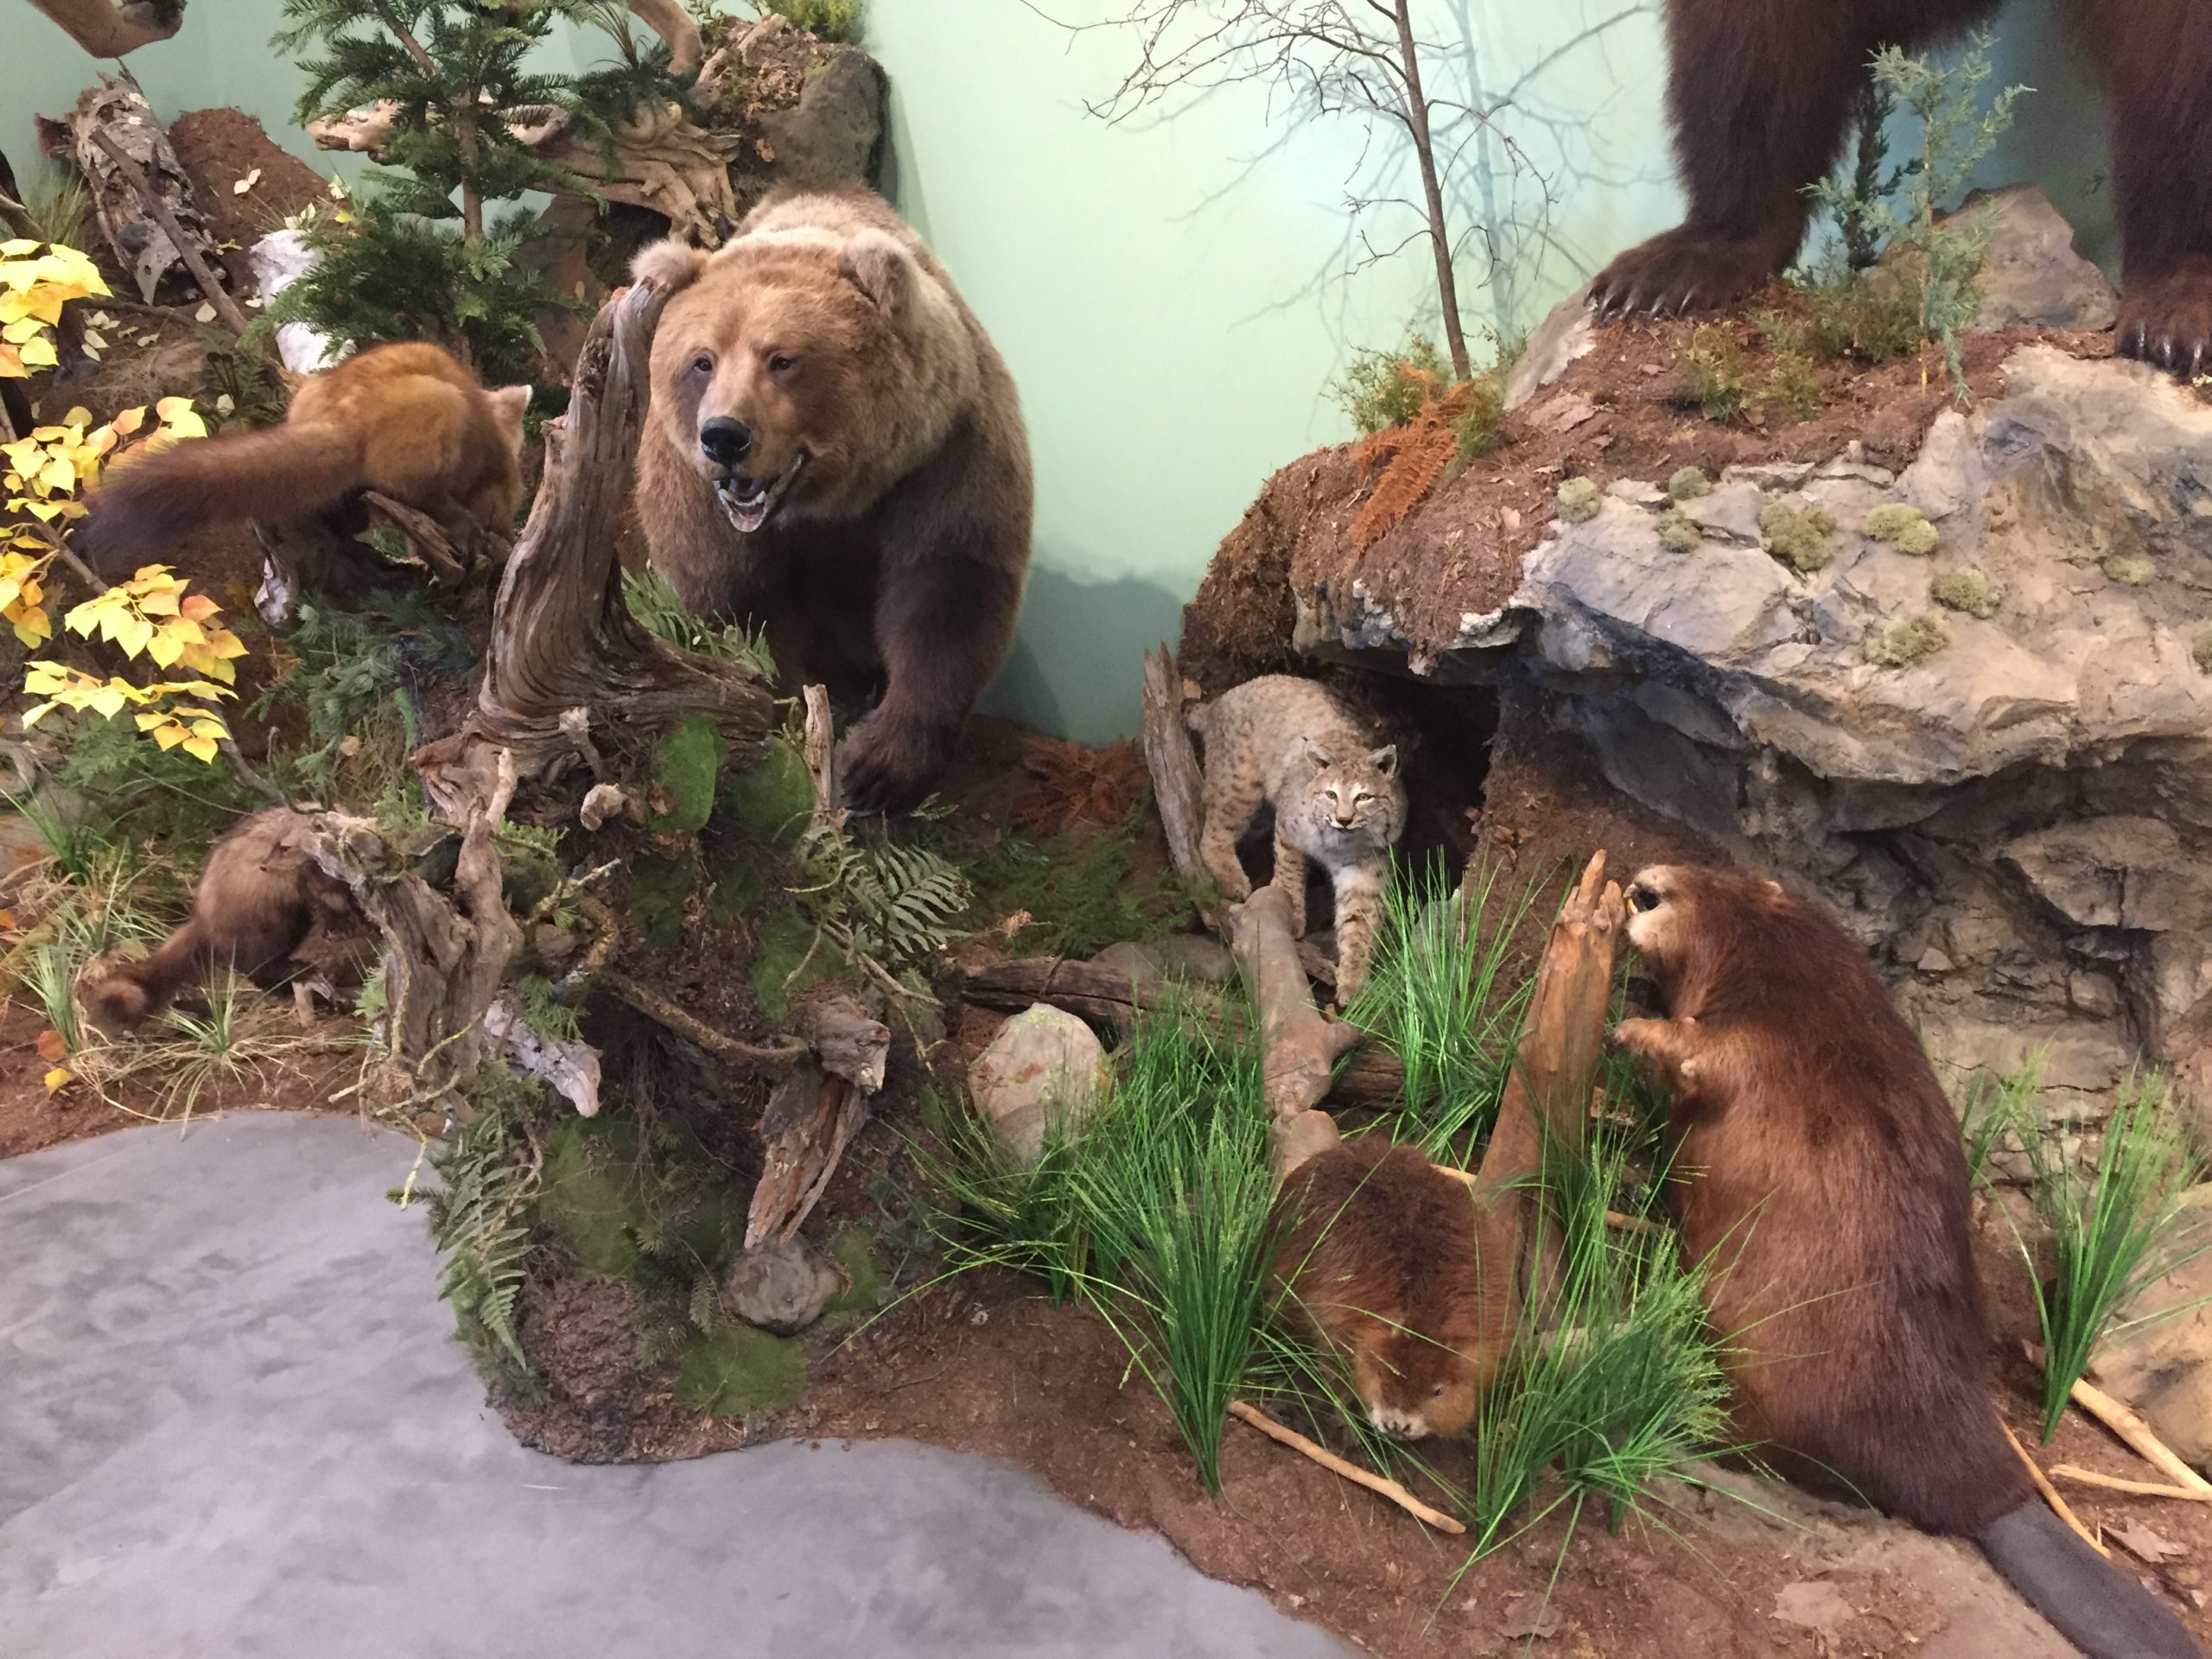 An example of some of their many taxidermy displays. 